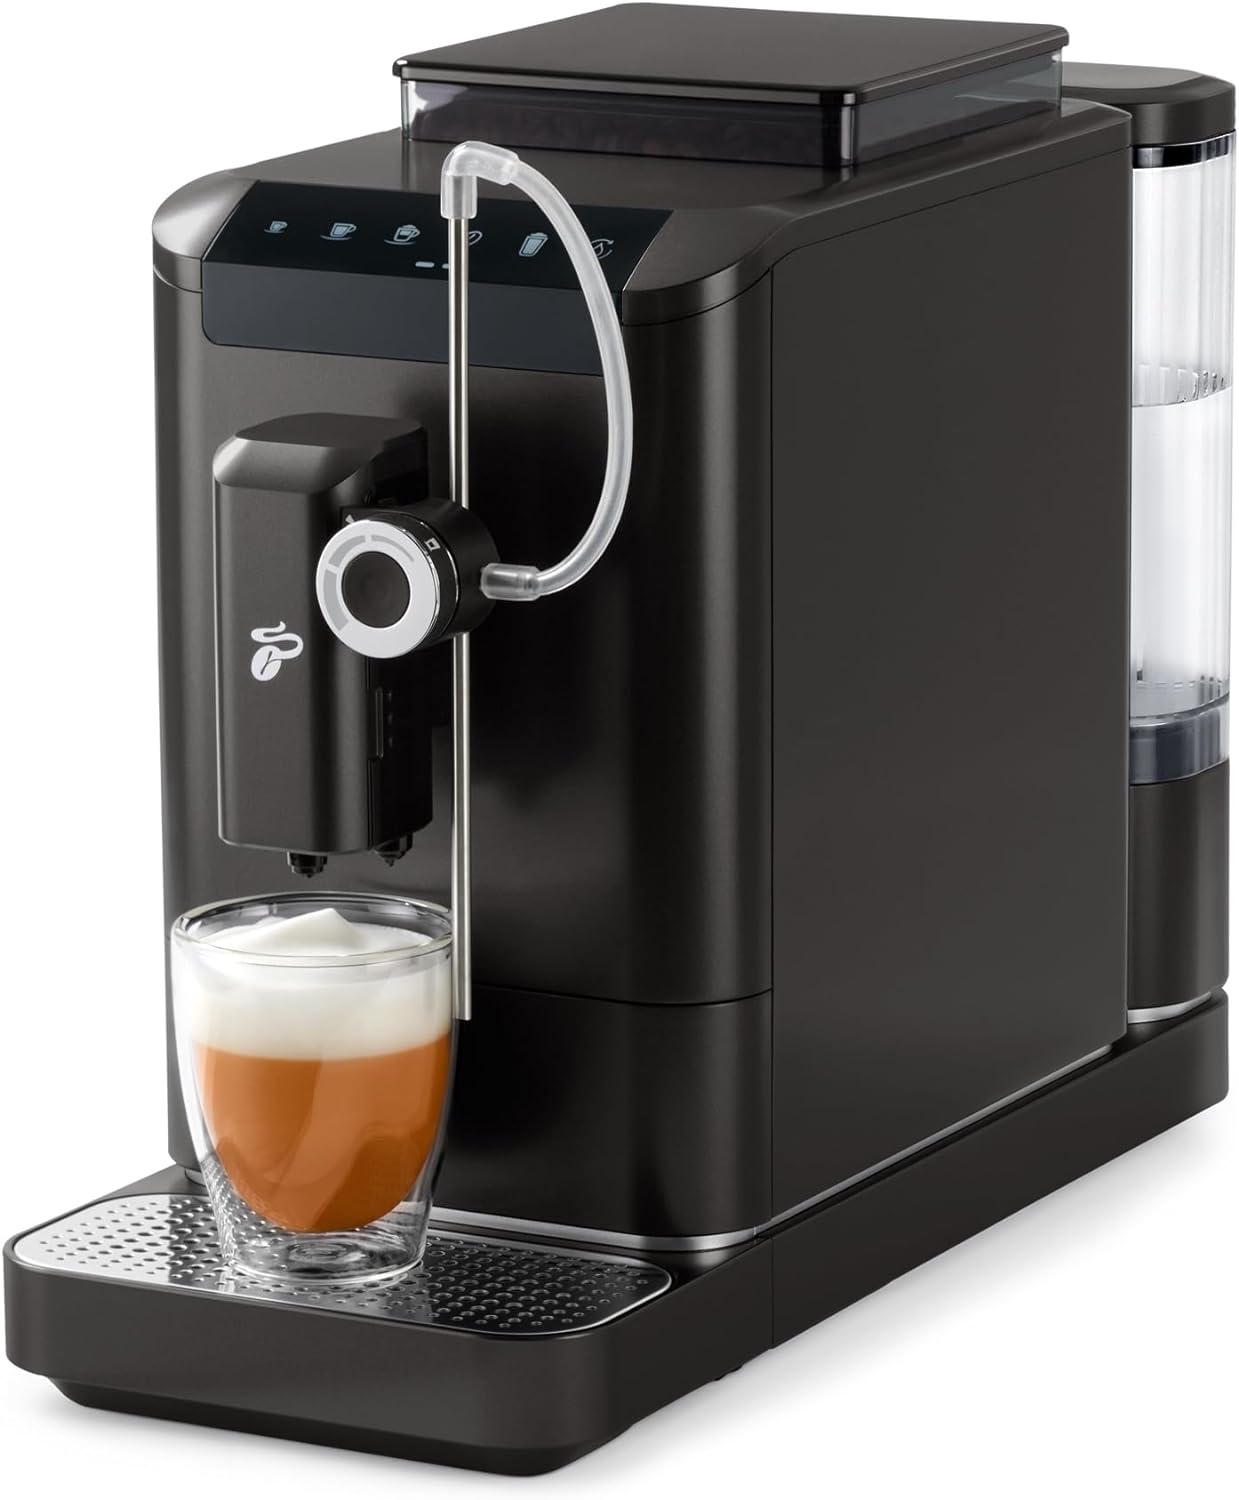 Tchibo Esperto2 Milk Fully Automatic Coffee Machine with One-Touch Milk Function and 2 Cup Function for Espresso, Caffè Crema, Cappuccino and Milk Froth, Granite Black